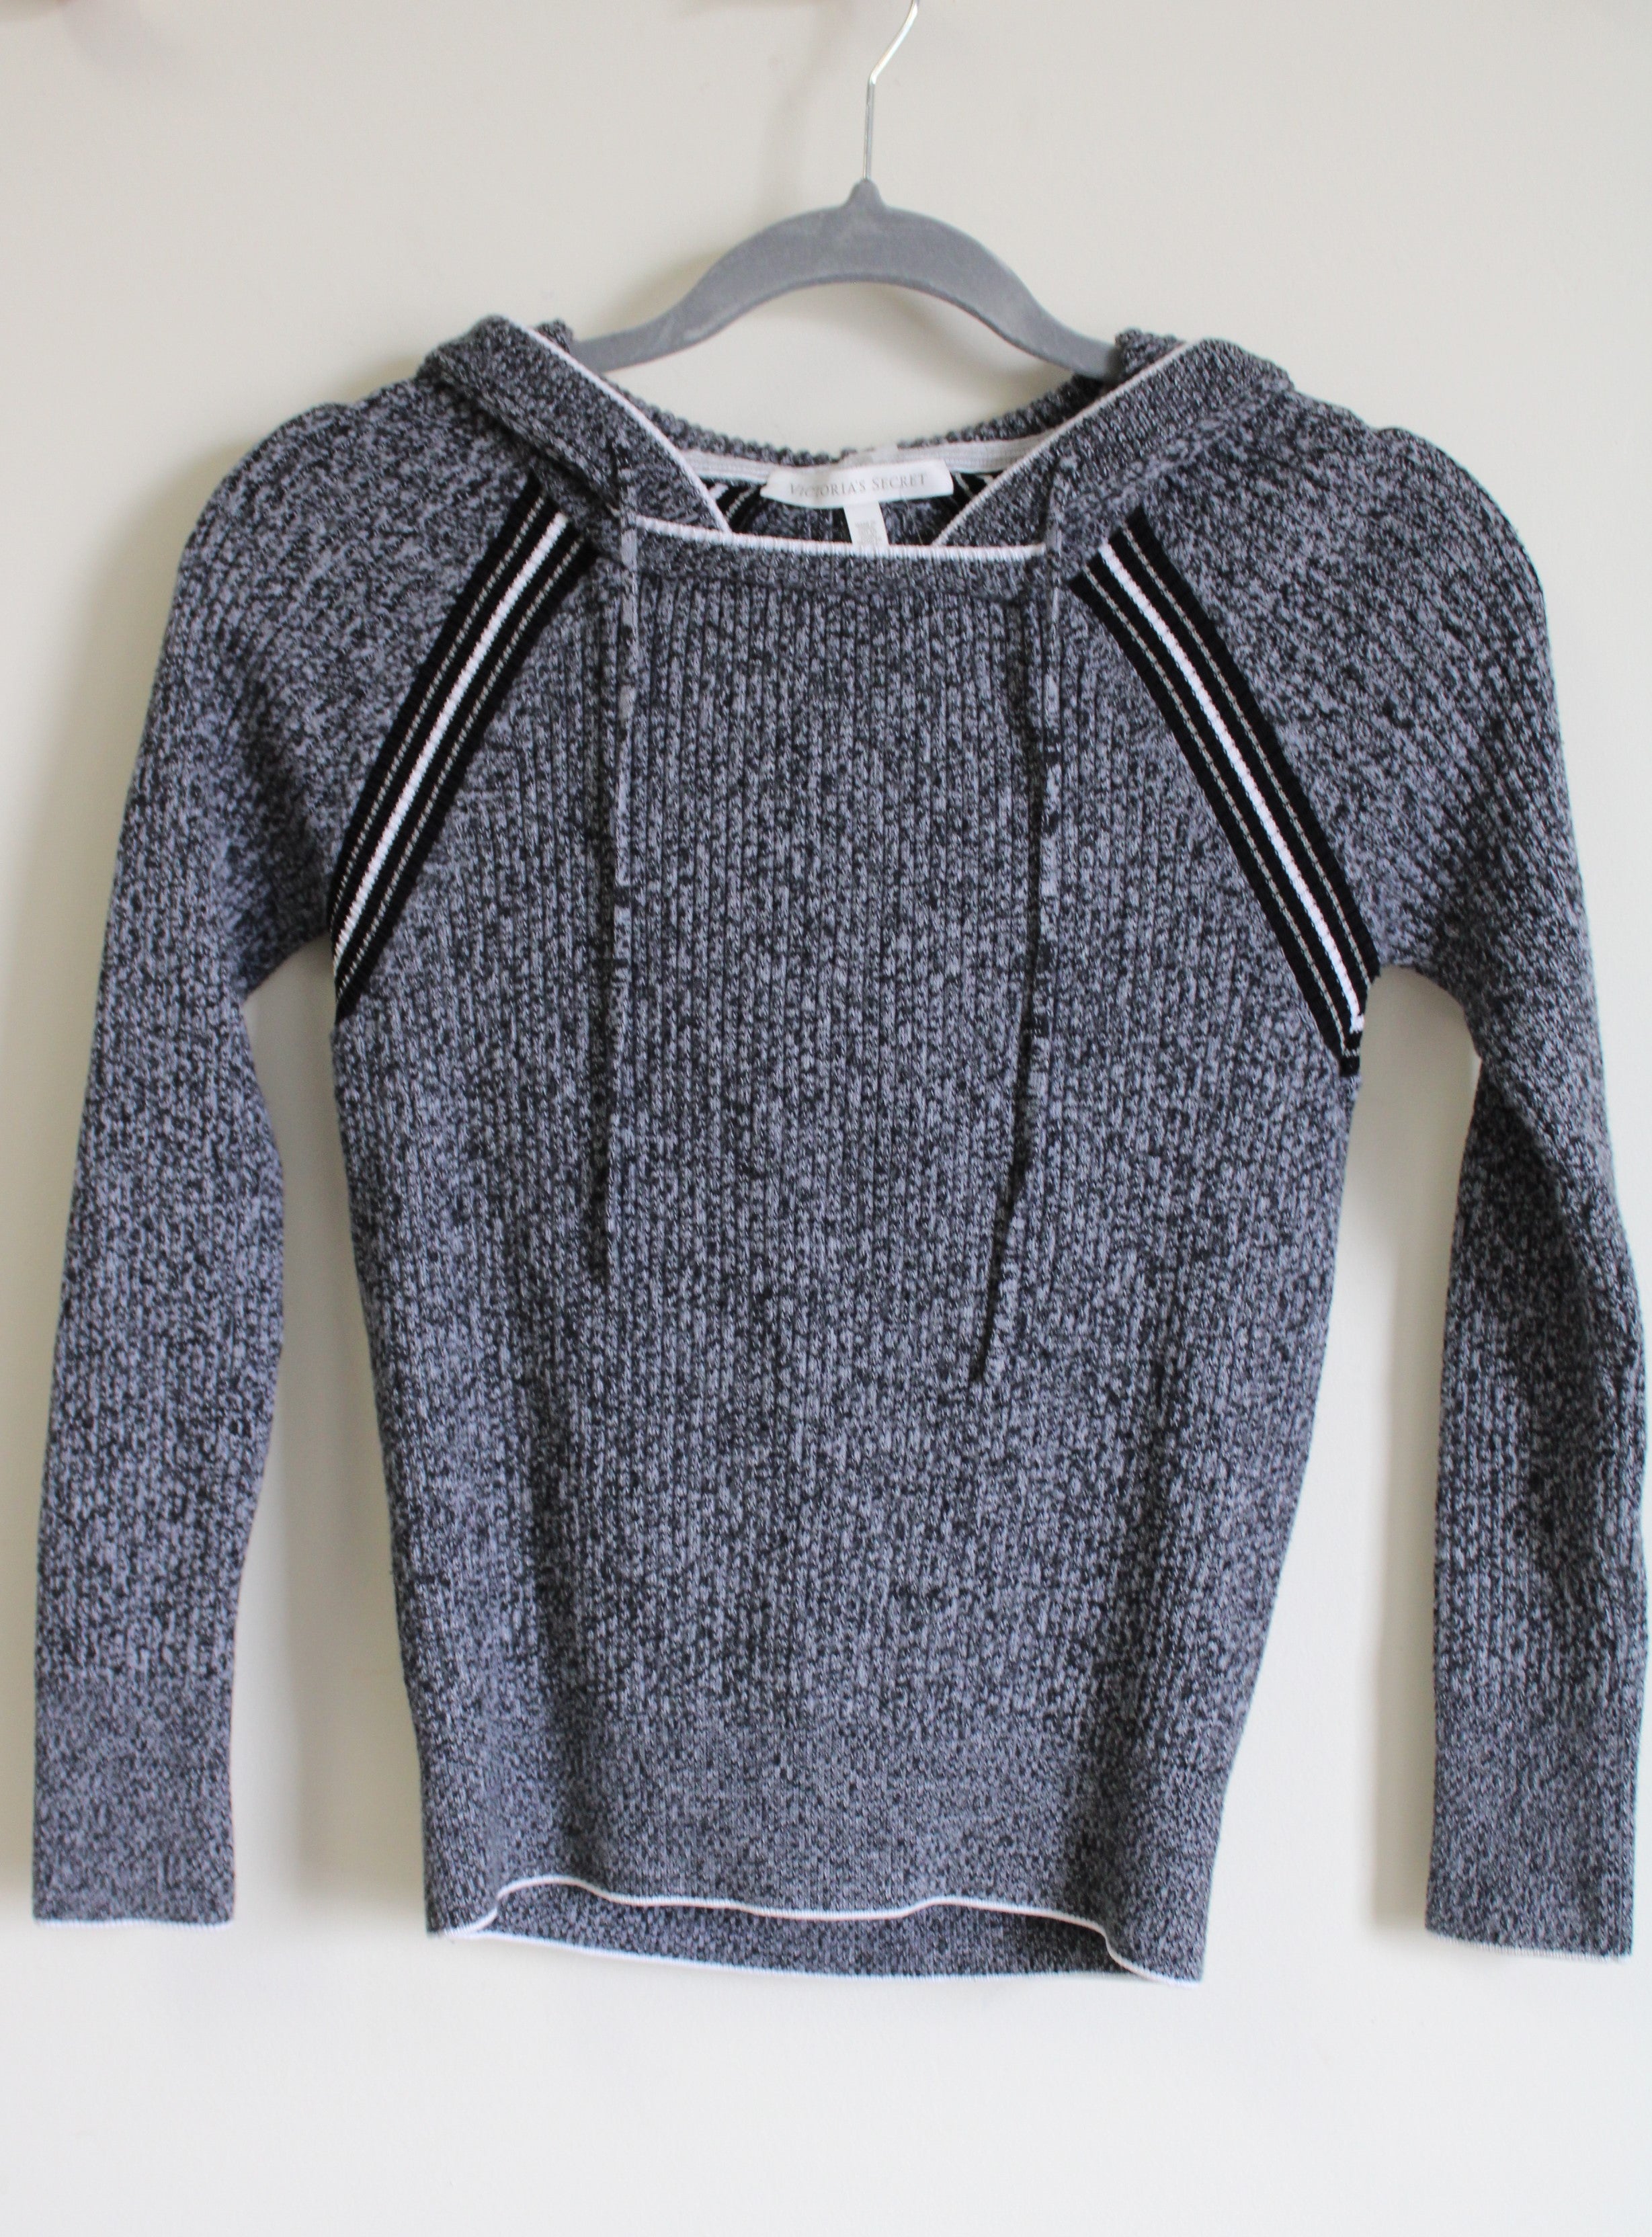 Victoria's Secret Gray Knit Hooded Sweater